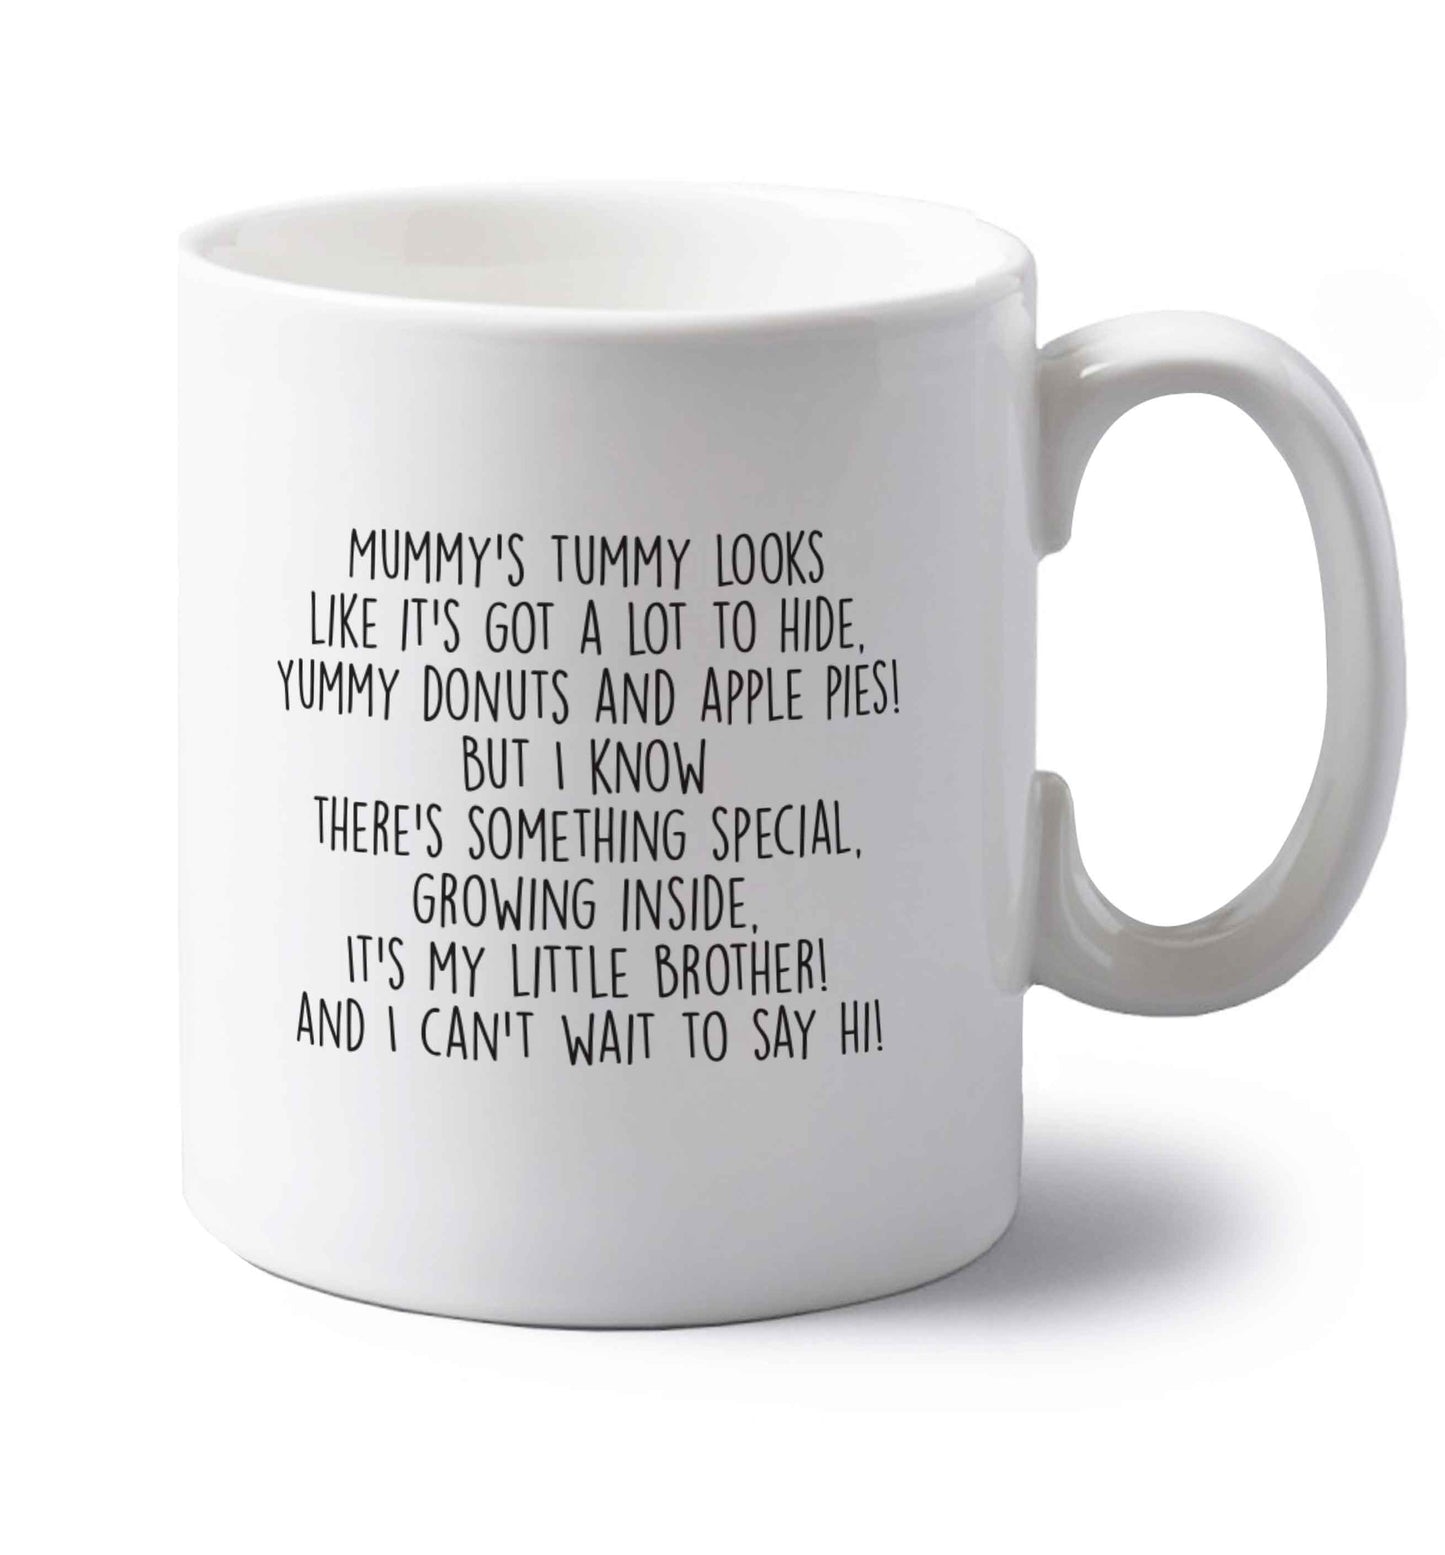 Something special growing inside it's my little brother I can't wait to say hi! left handed white ceramic mug 